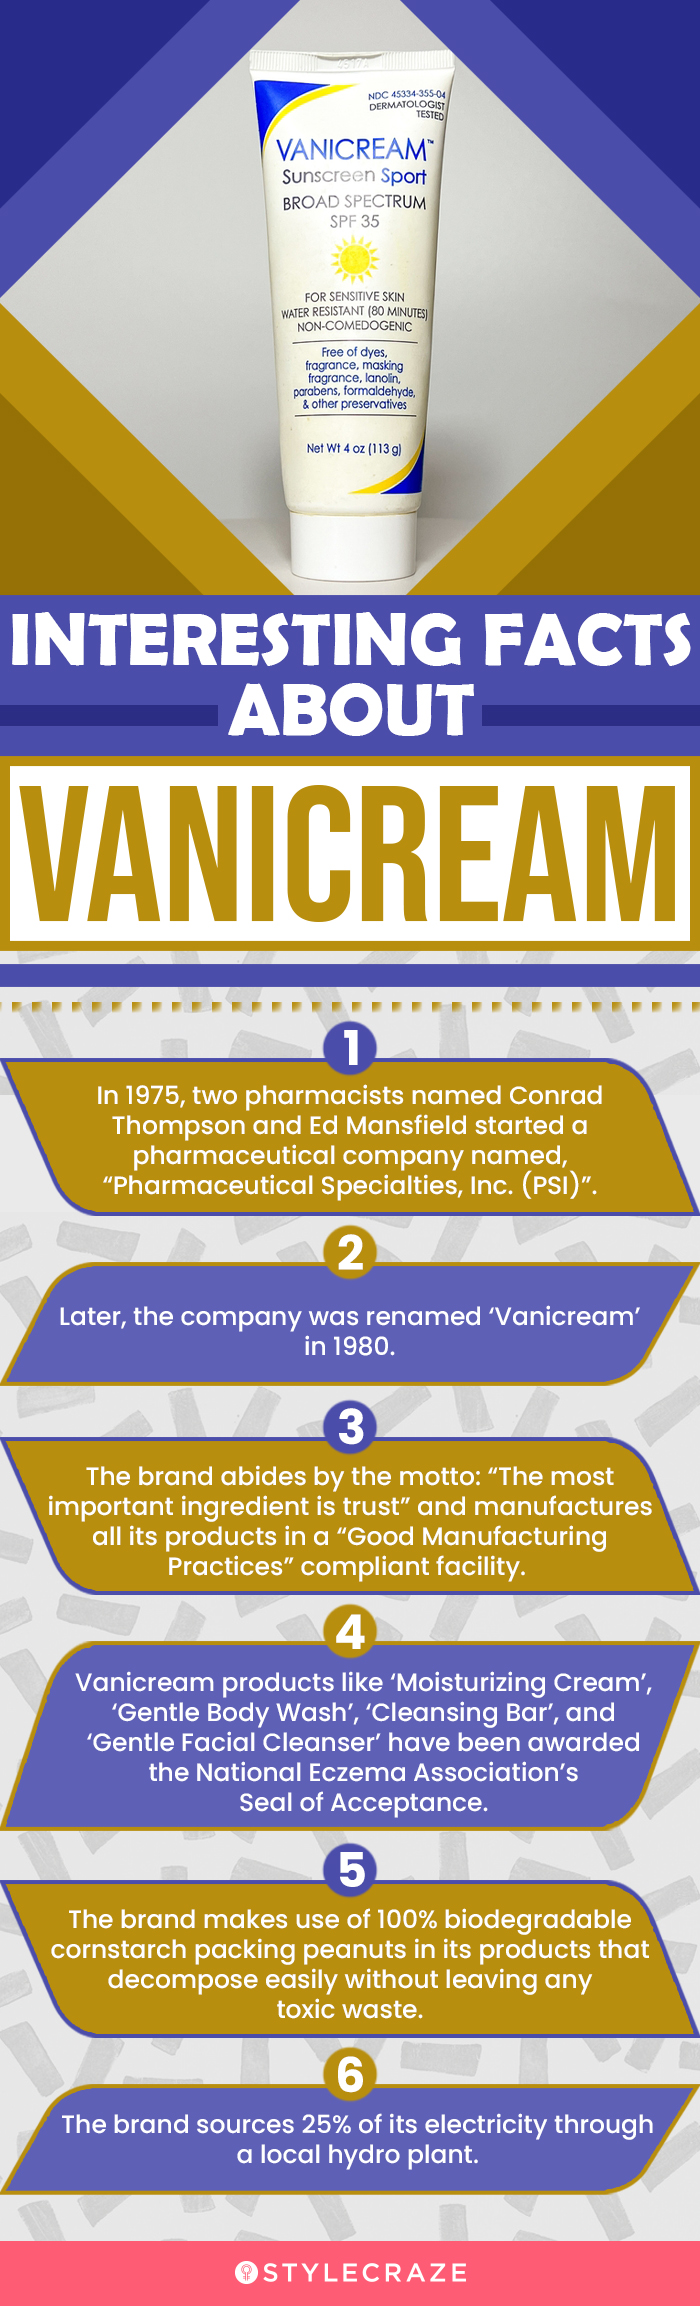 Interesting Facts About Vanicream (infographic)